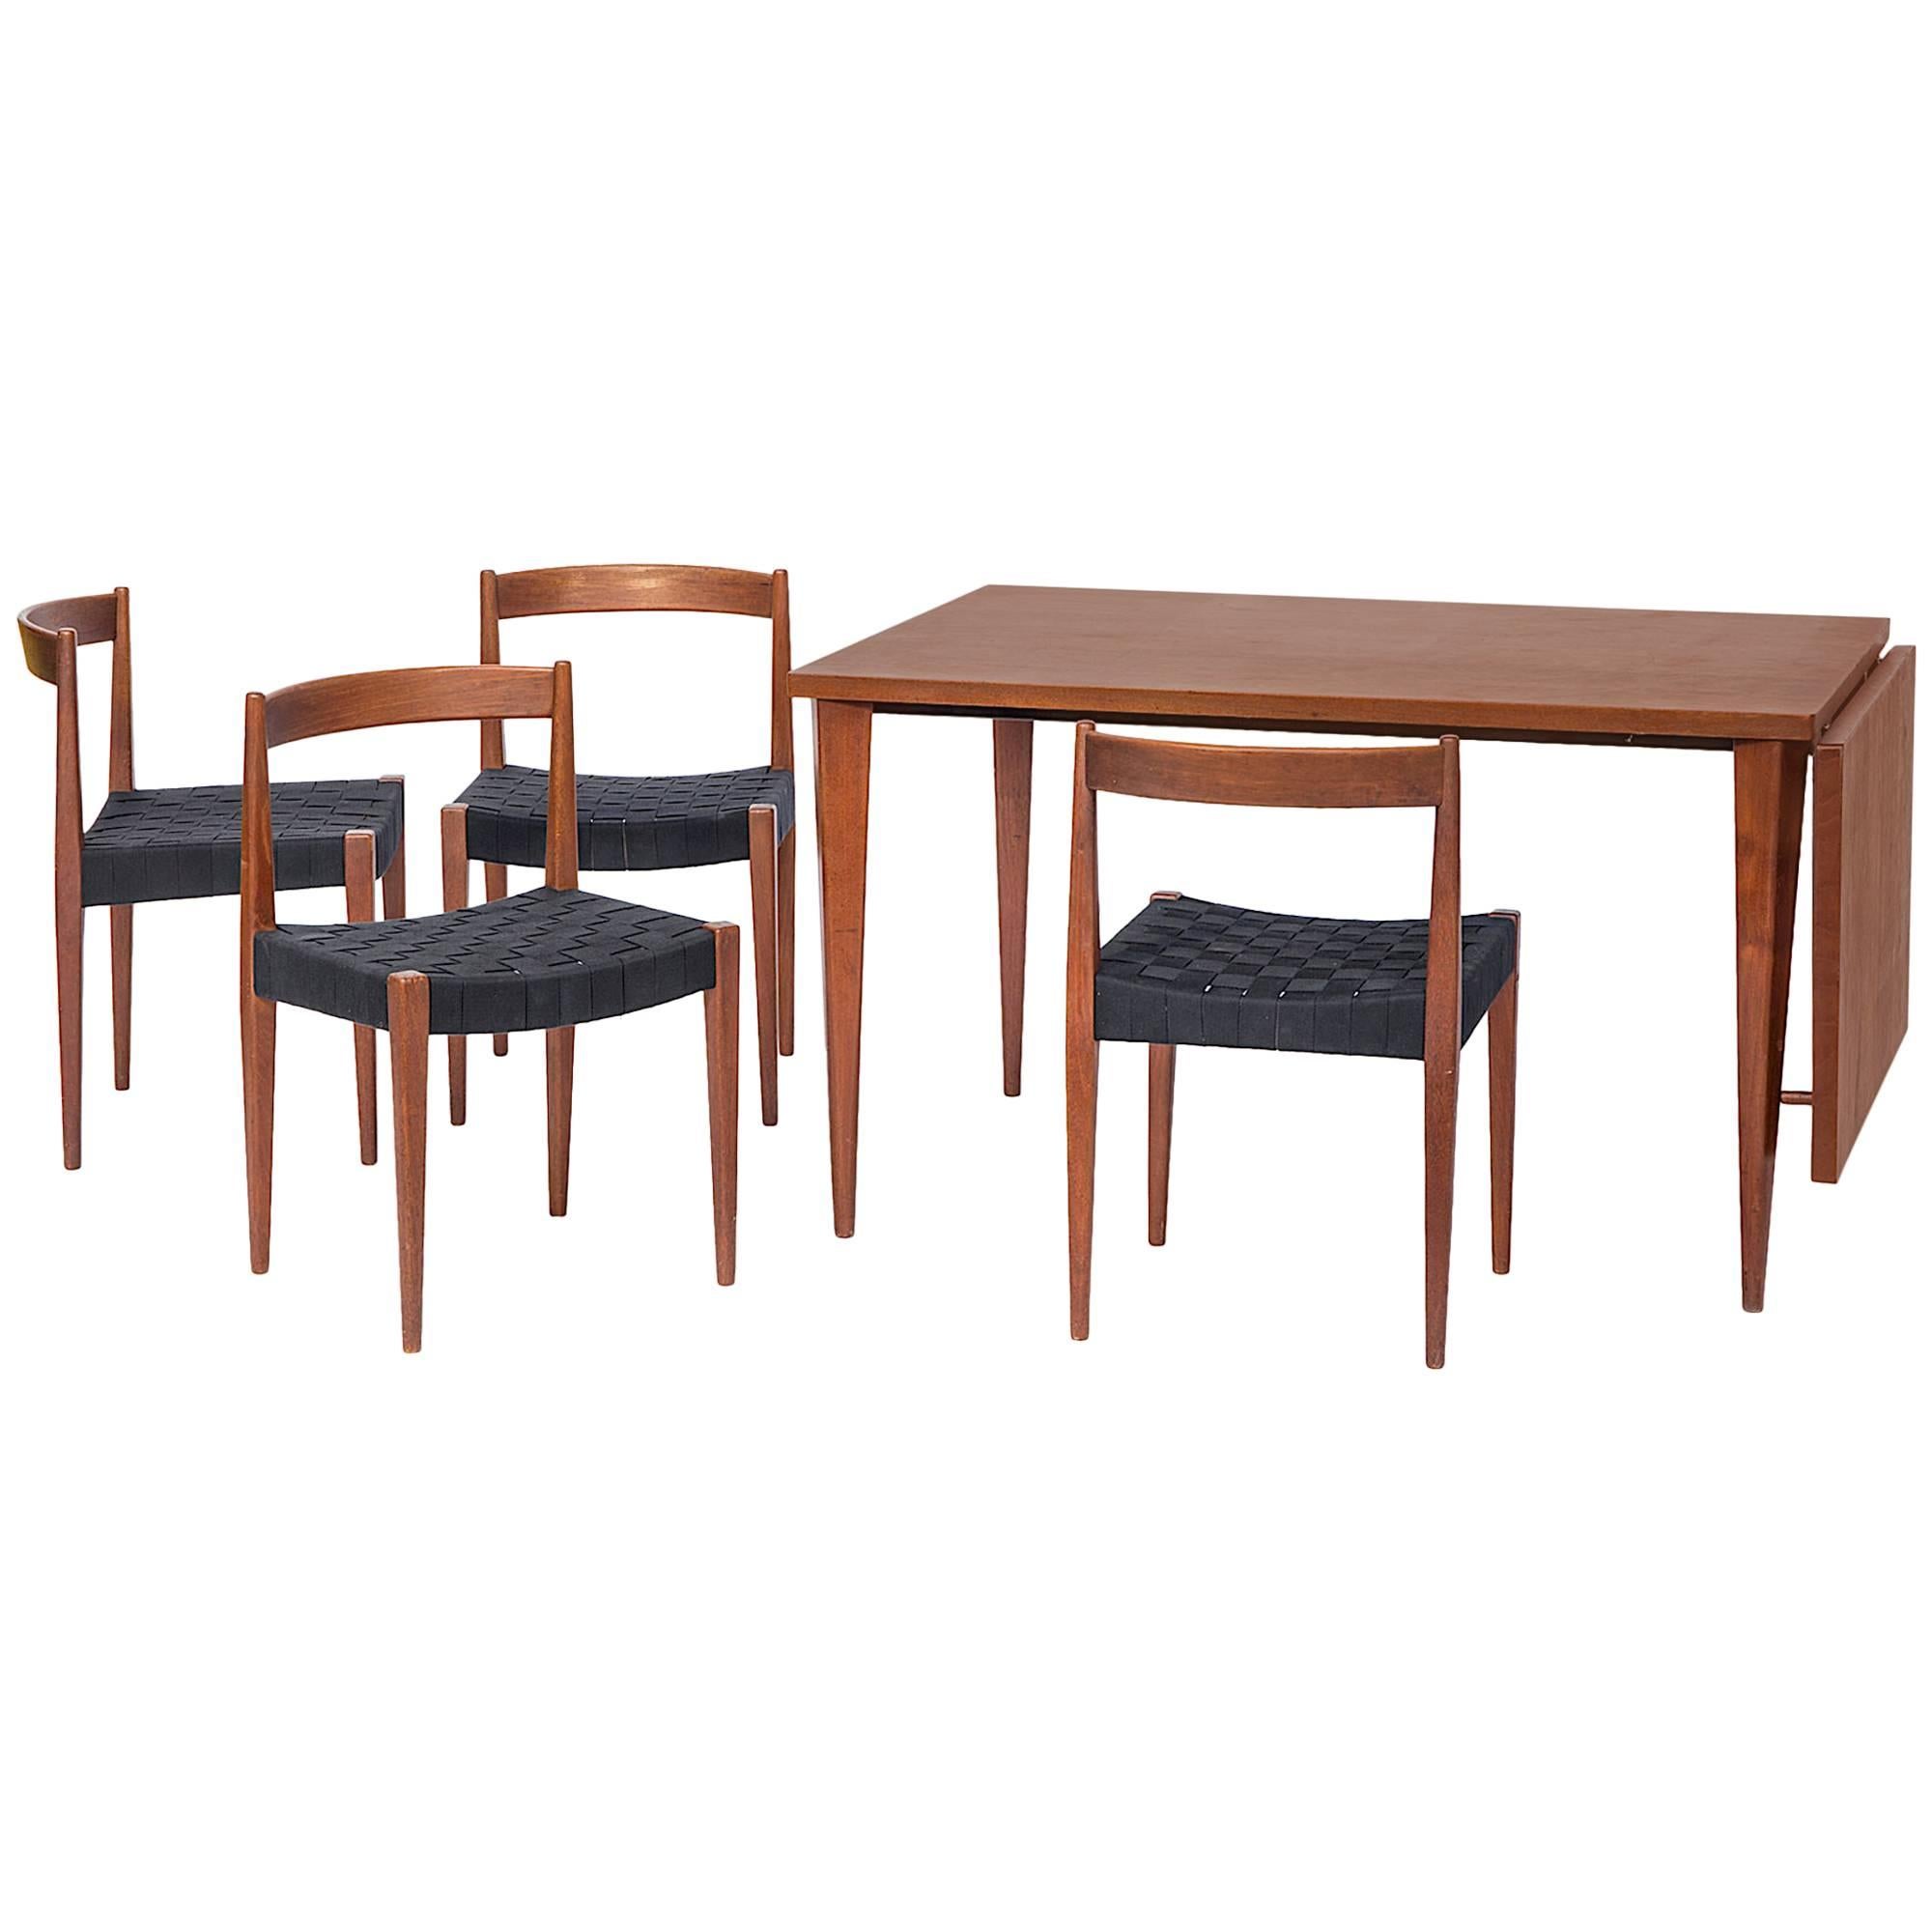 Nanna Ditzel Four Chairs  and Dining Table with Drop Leaf, Teak, 1955